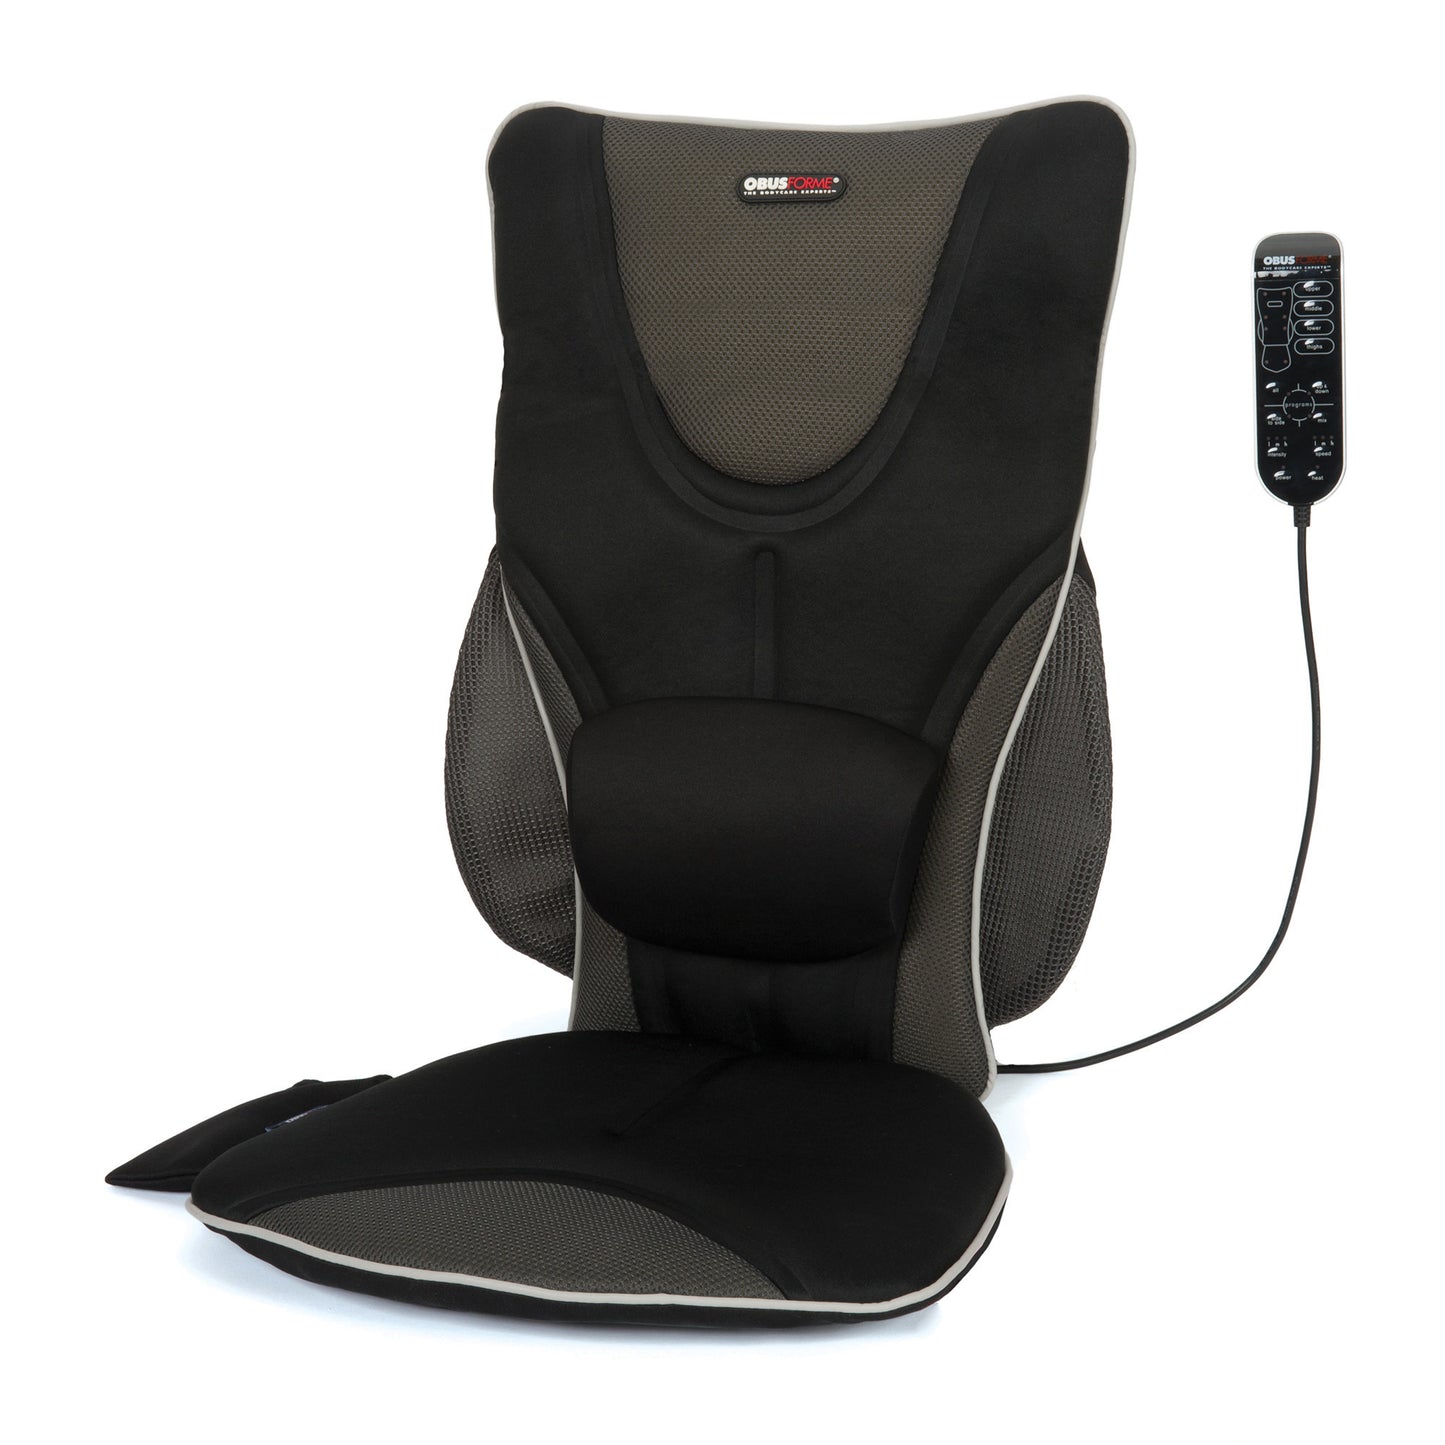 ObusForme Home/Auto Back & Seat Heated Massage Cushion with Remote - 15-07376